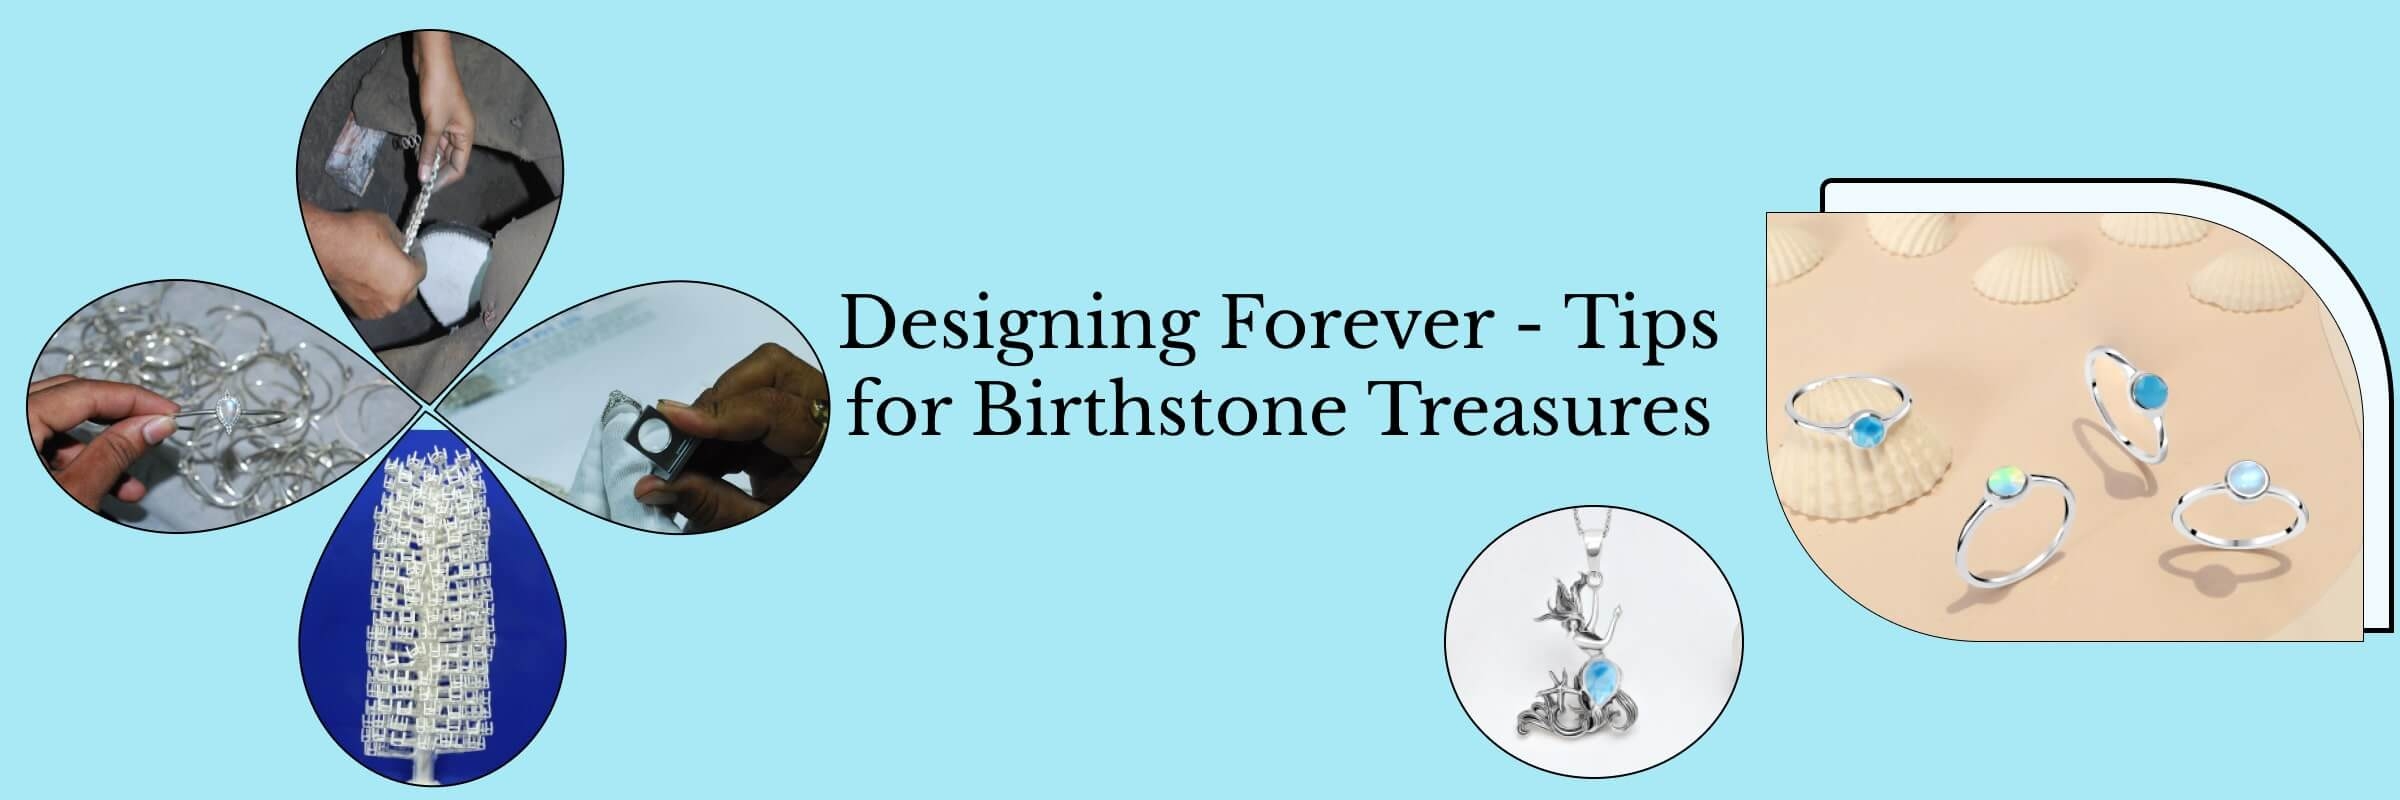 Tips for Creating Timeless Custom Birthstone Jewelry: